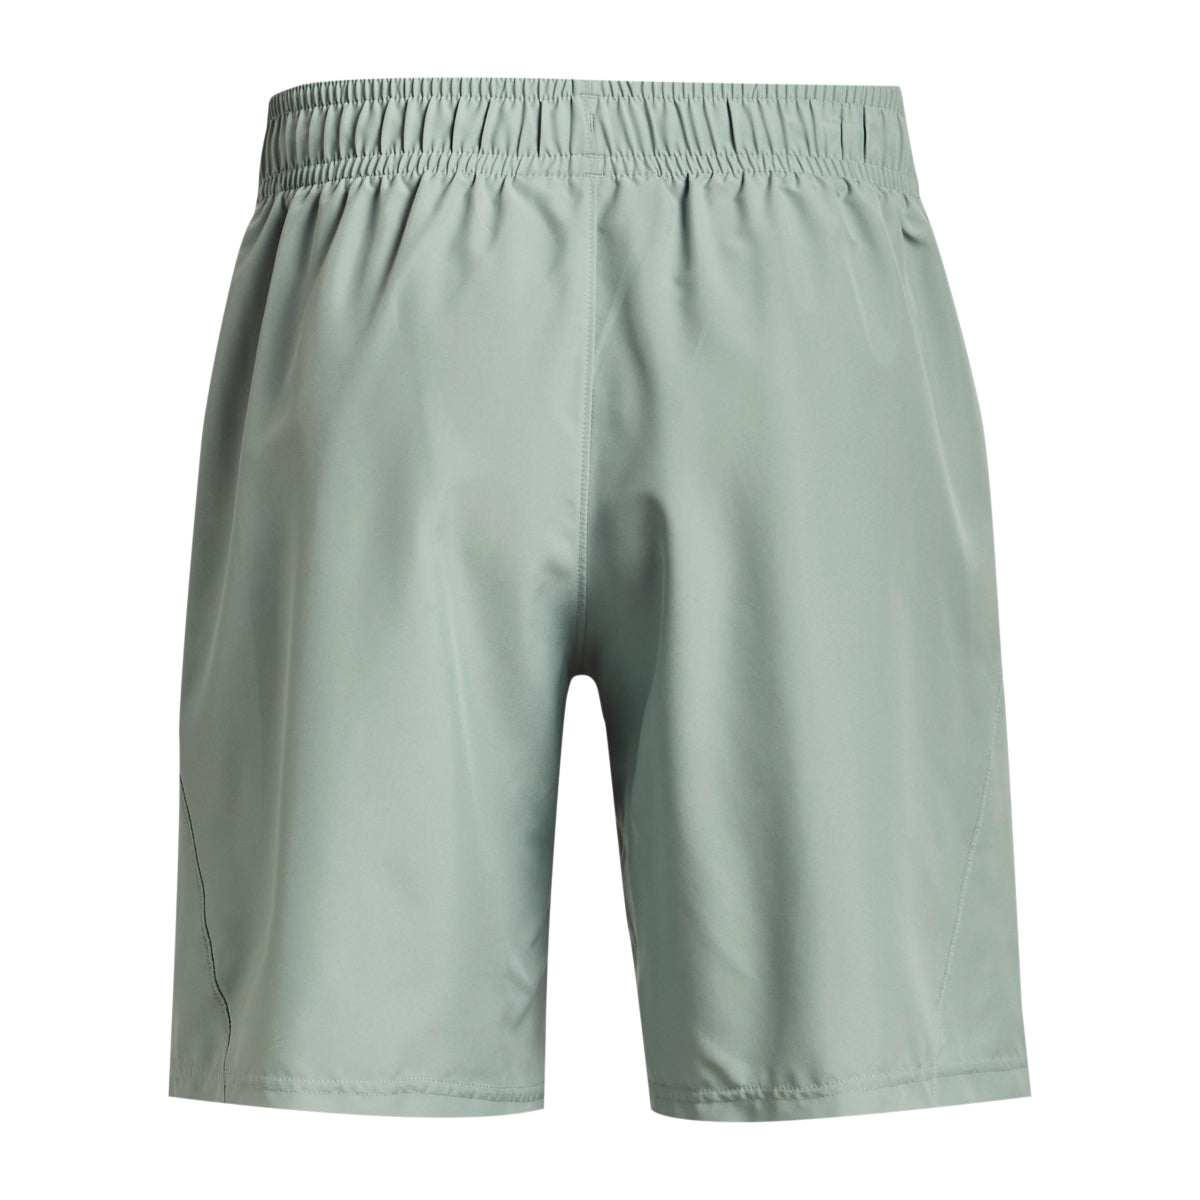 Under Armour Woven Graphic Wordmark Shorts - Mens - Opal Green/Rise